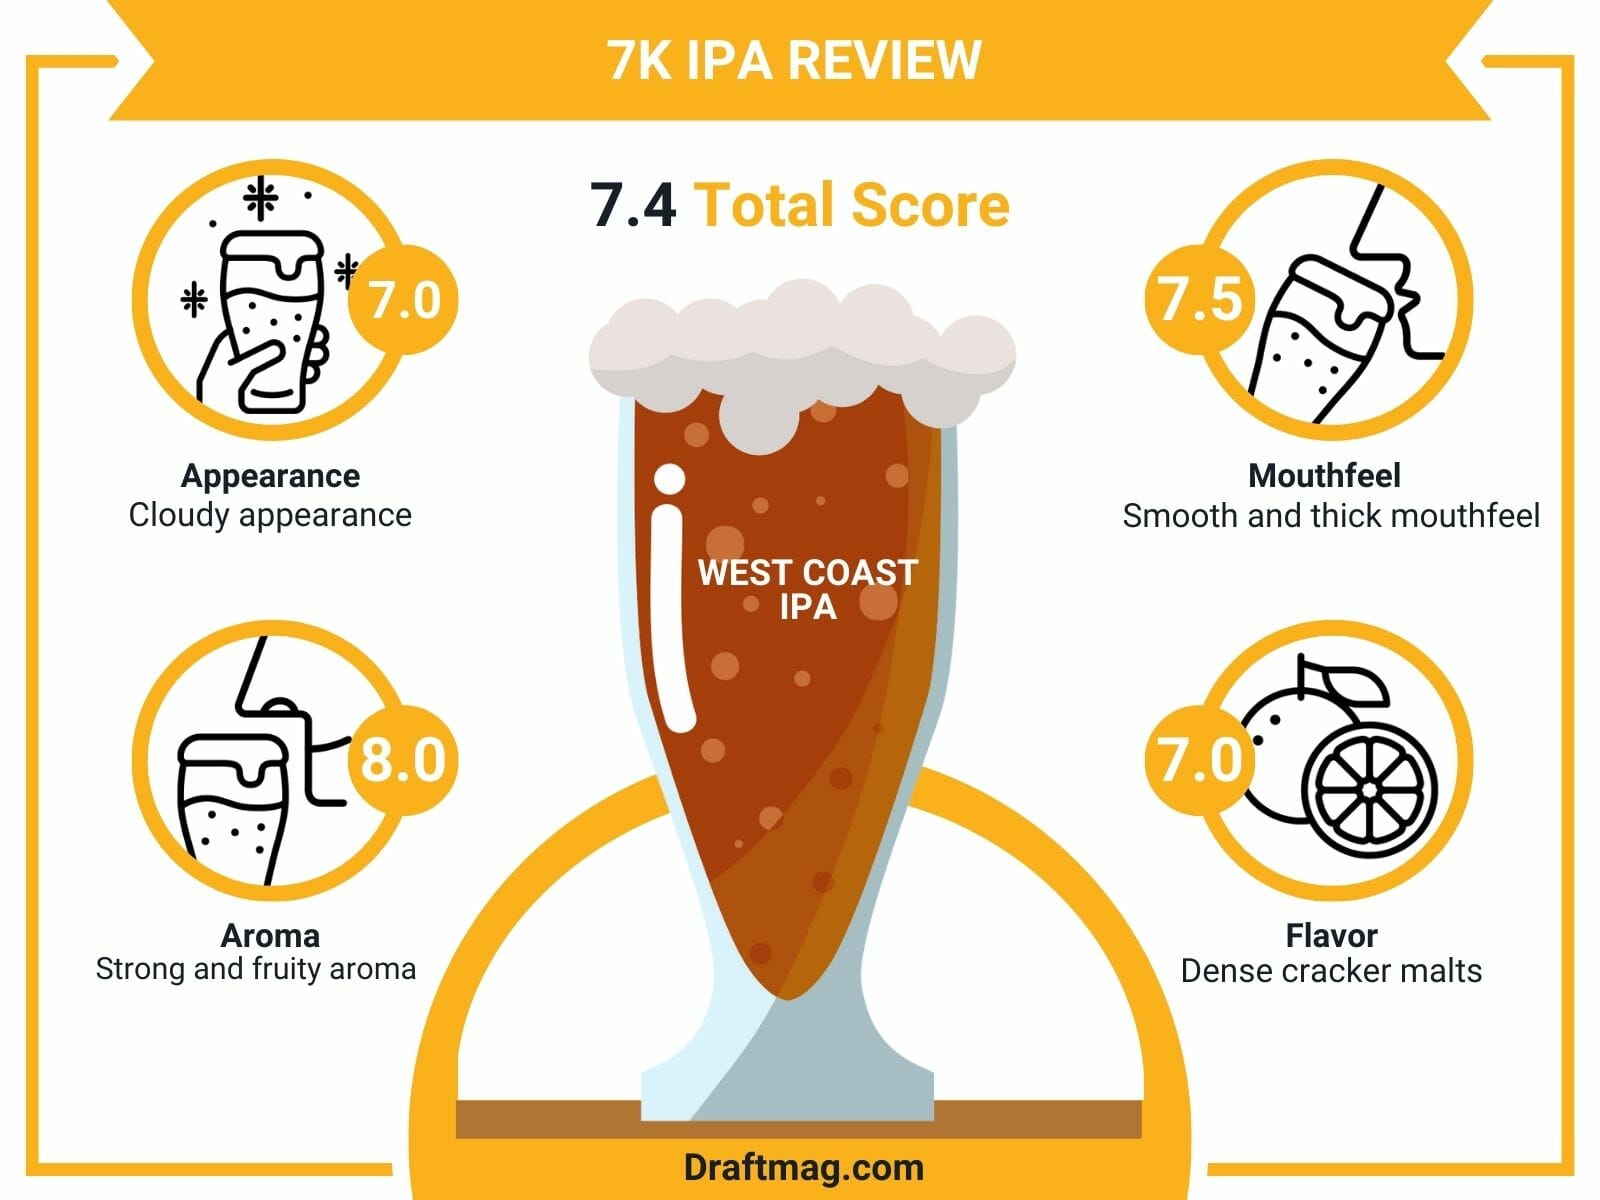 7k IPA Review Infographic